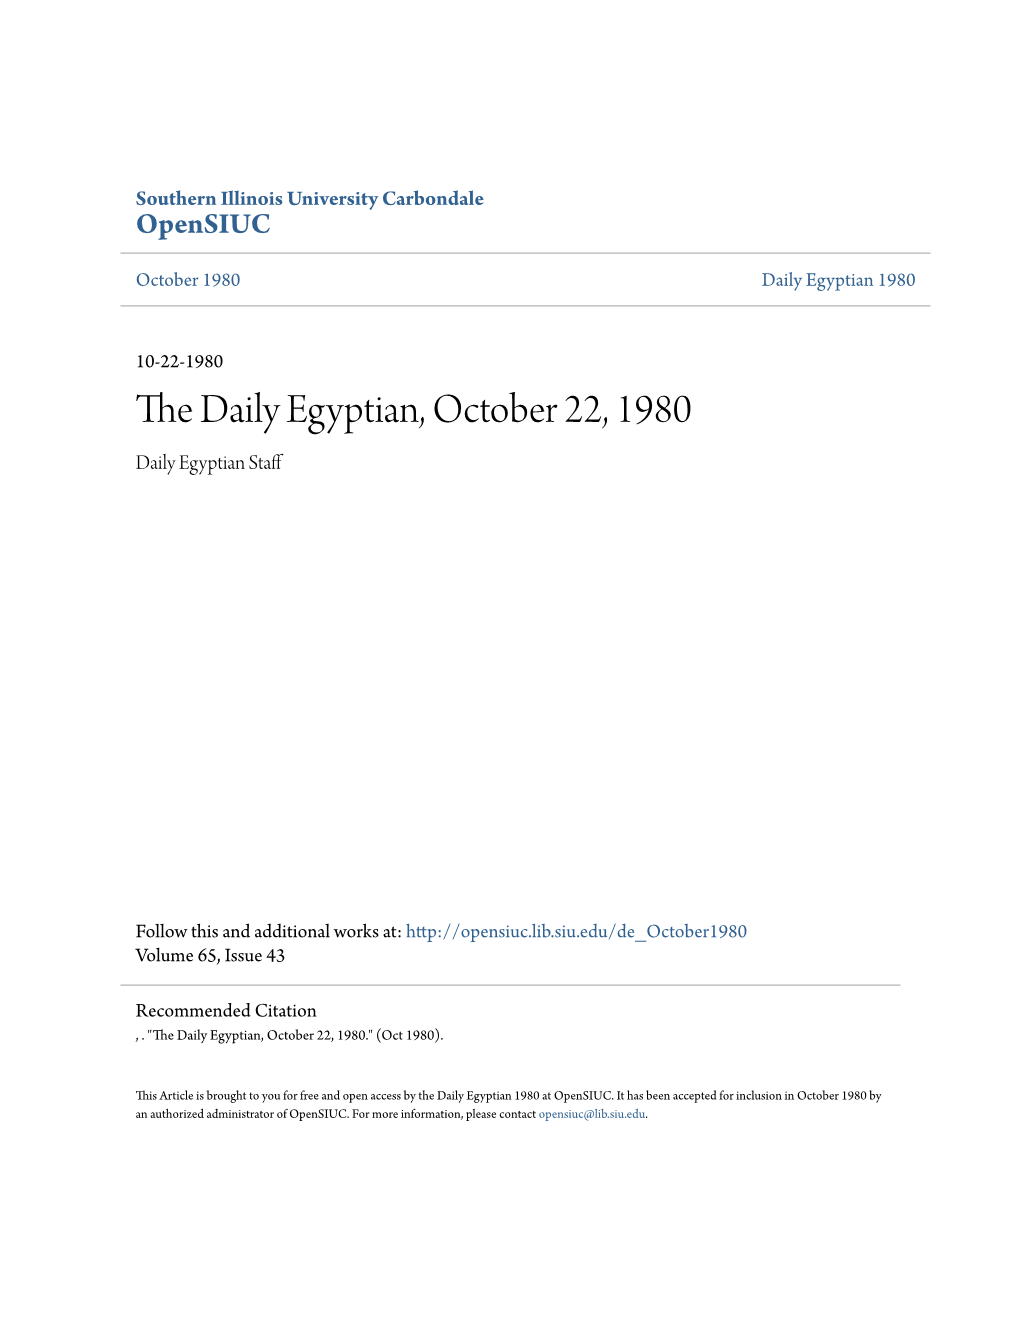 The Daily Egyptian, October 22, 1980